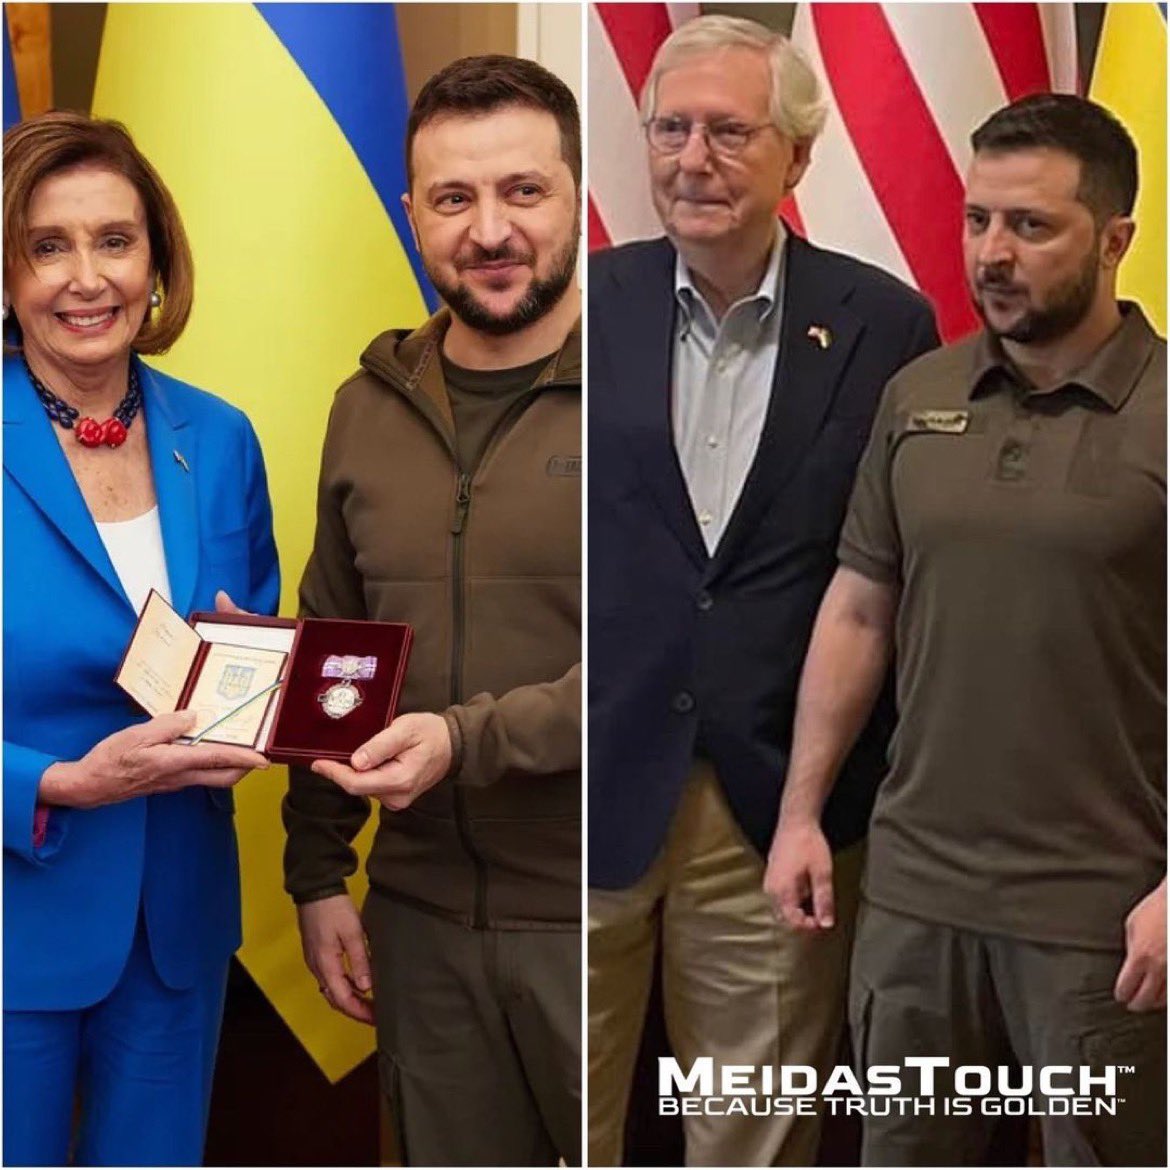 A true leader knows the difference between true allies and politicians delivering lip service. 
As evidenced by this photo, @ZelenskyyUa definitely knows what time it is. #IStandWithUkraine #StandWithUkraine